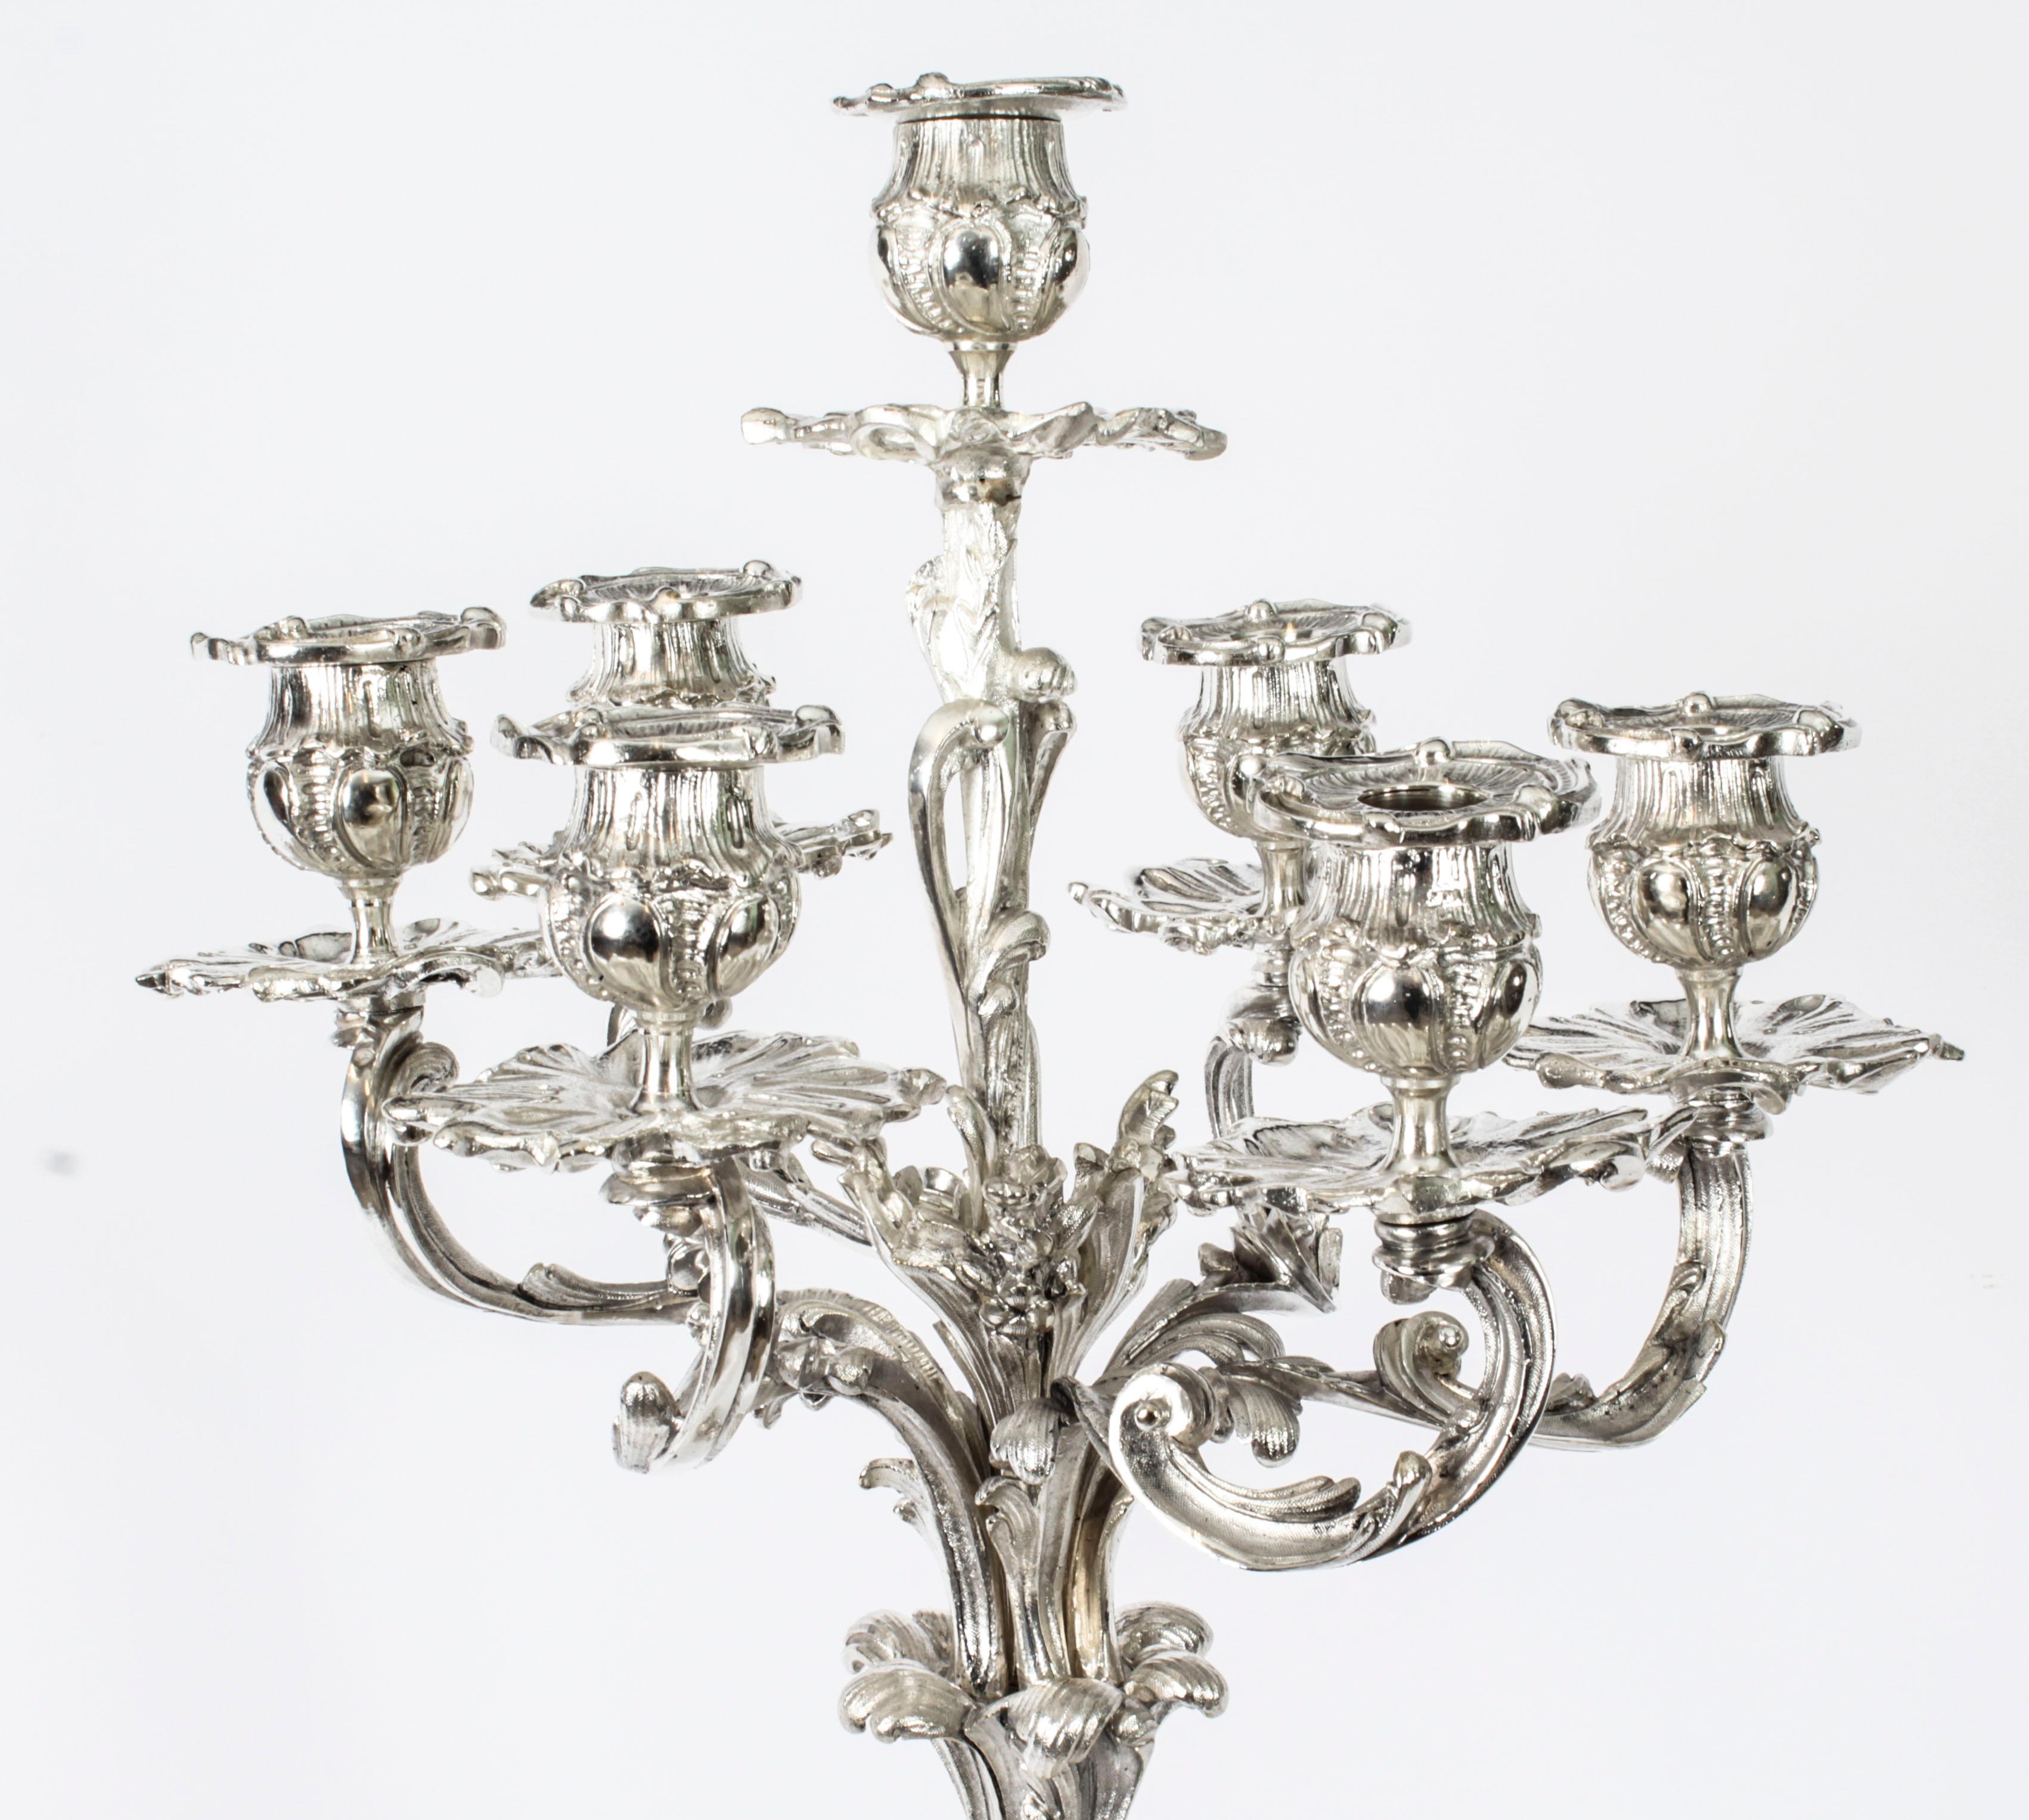 Antique Pair French Rococo Revival 7 Light Silver Plated Candelabra 1920s 16